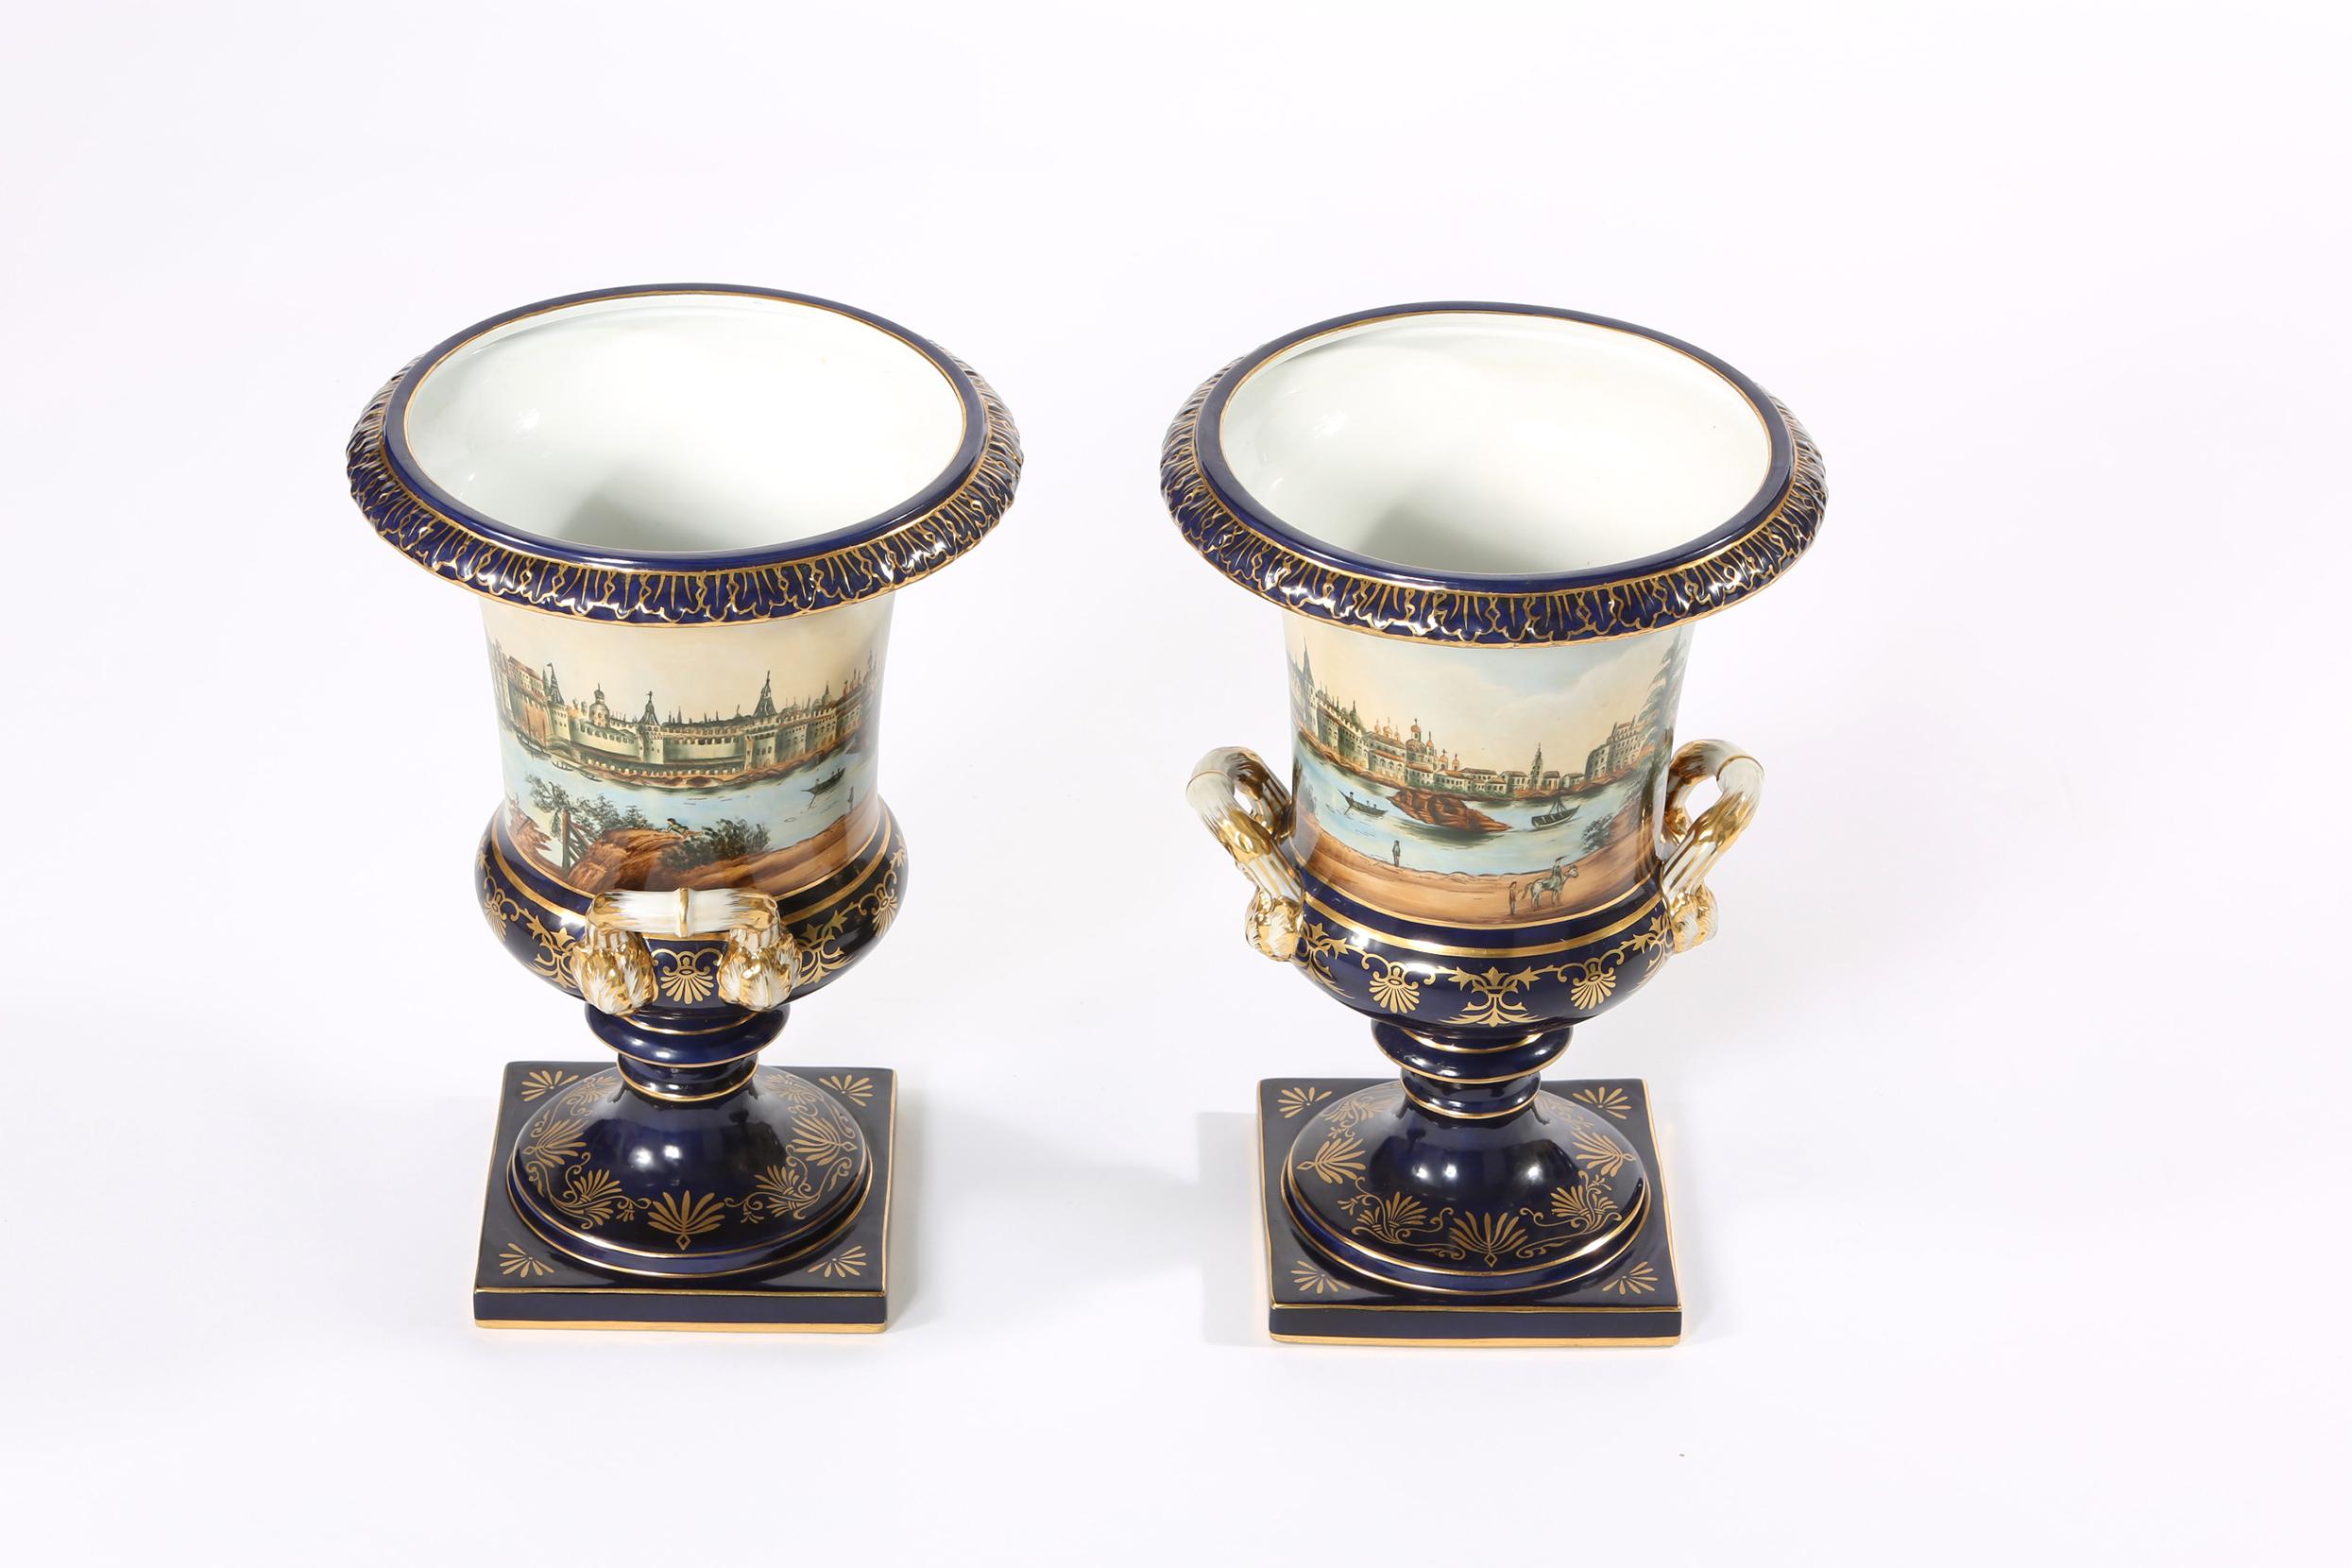 Early 20th century pair porcelain decorative urns / campana shaped vases with gilt gold side handles and exterior design details. Each vase is in great vintage condition. Minor wear consistent with age / use. Maker's mark undersigned. Each vase